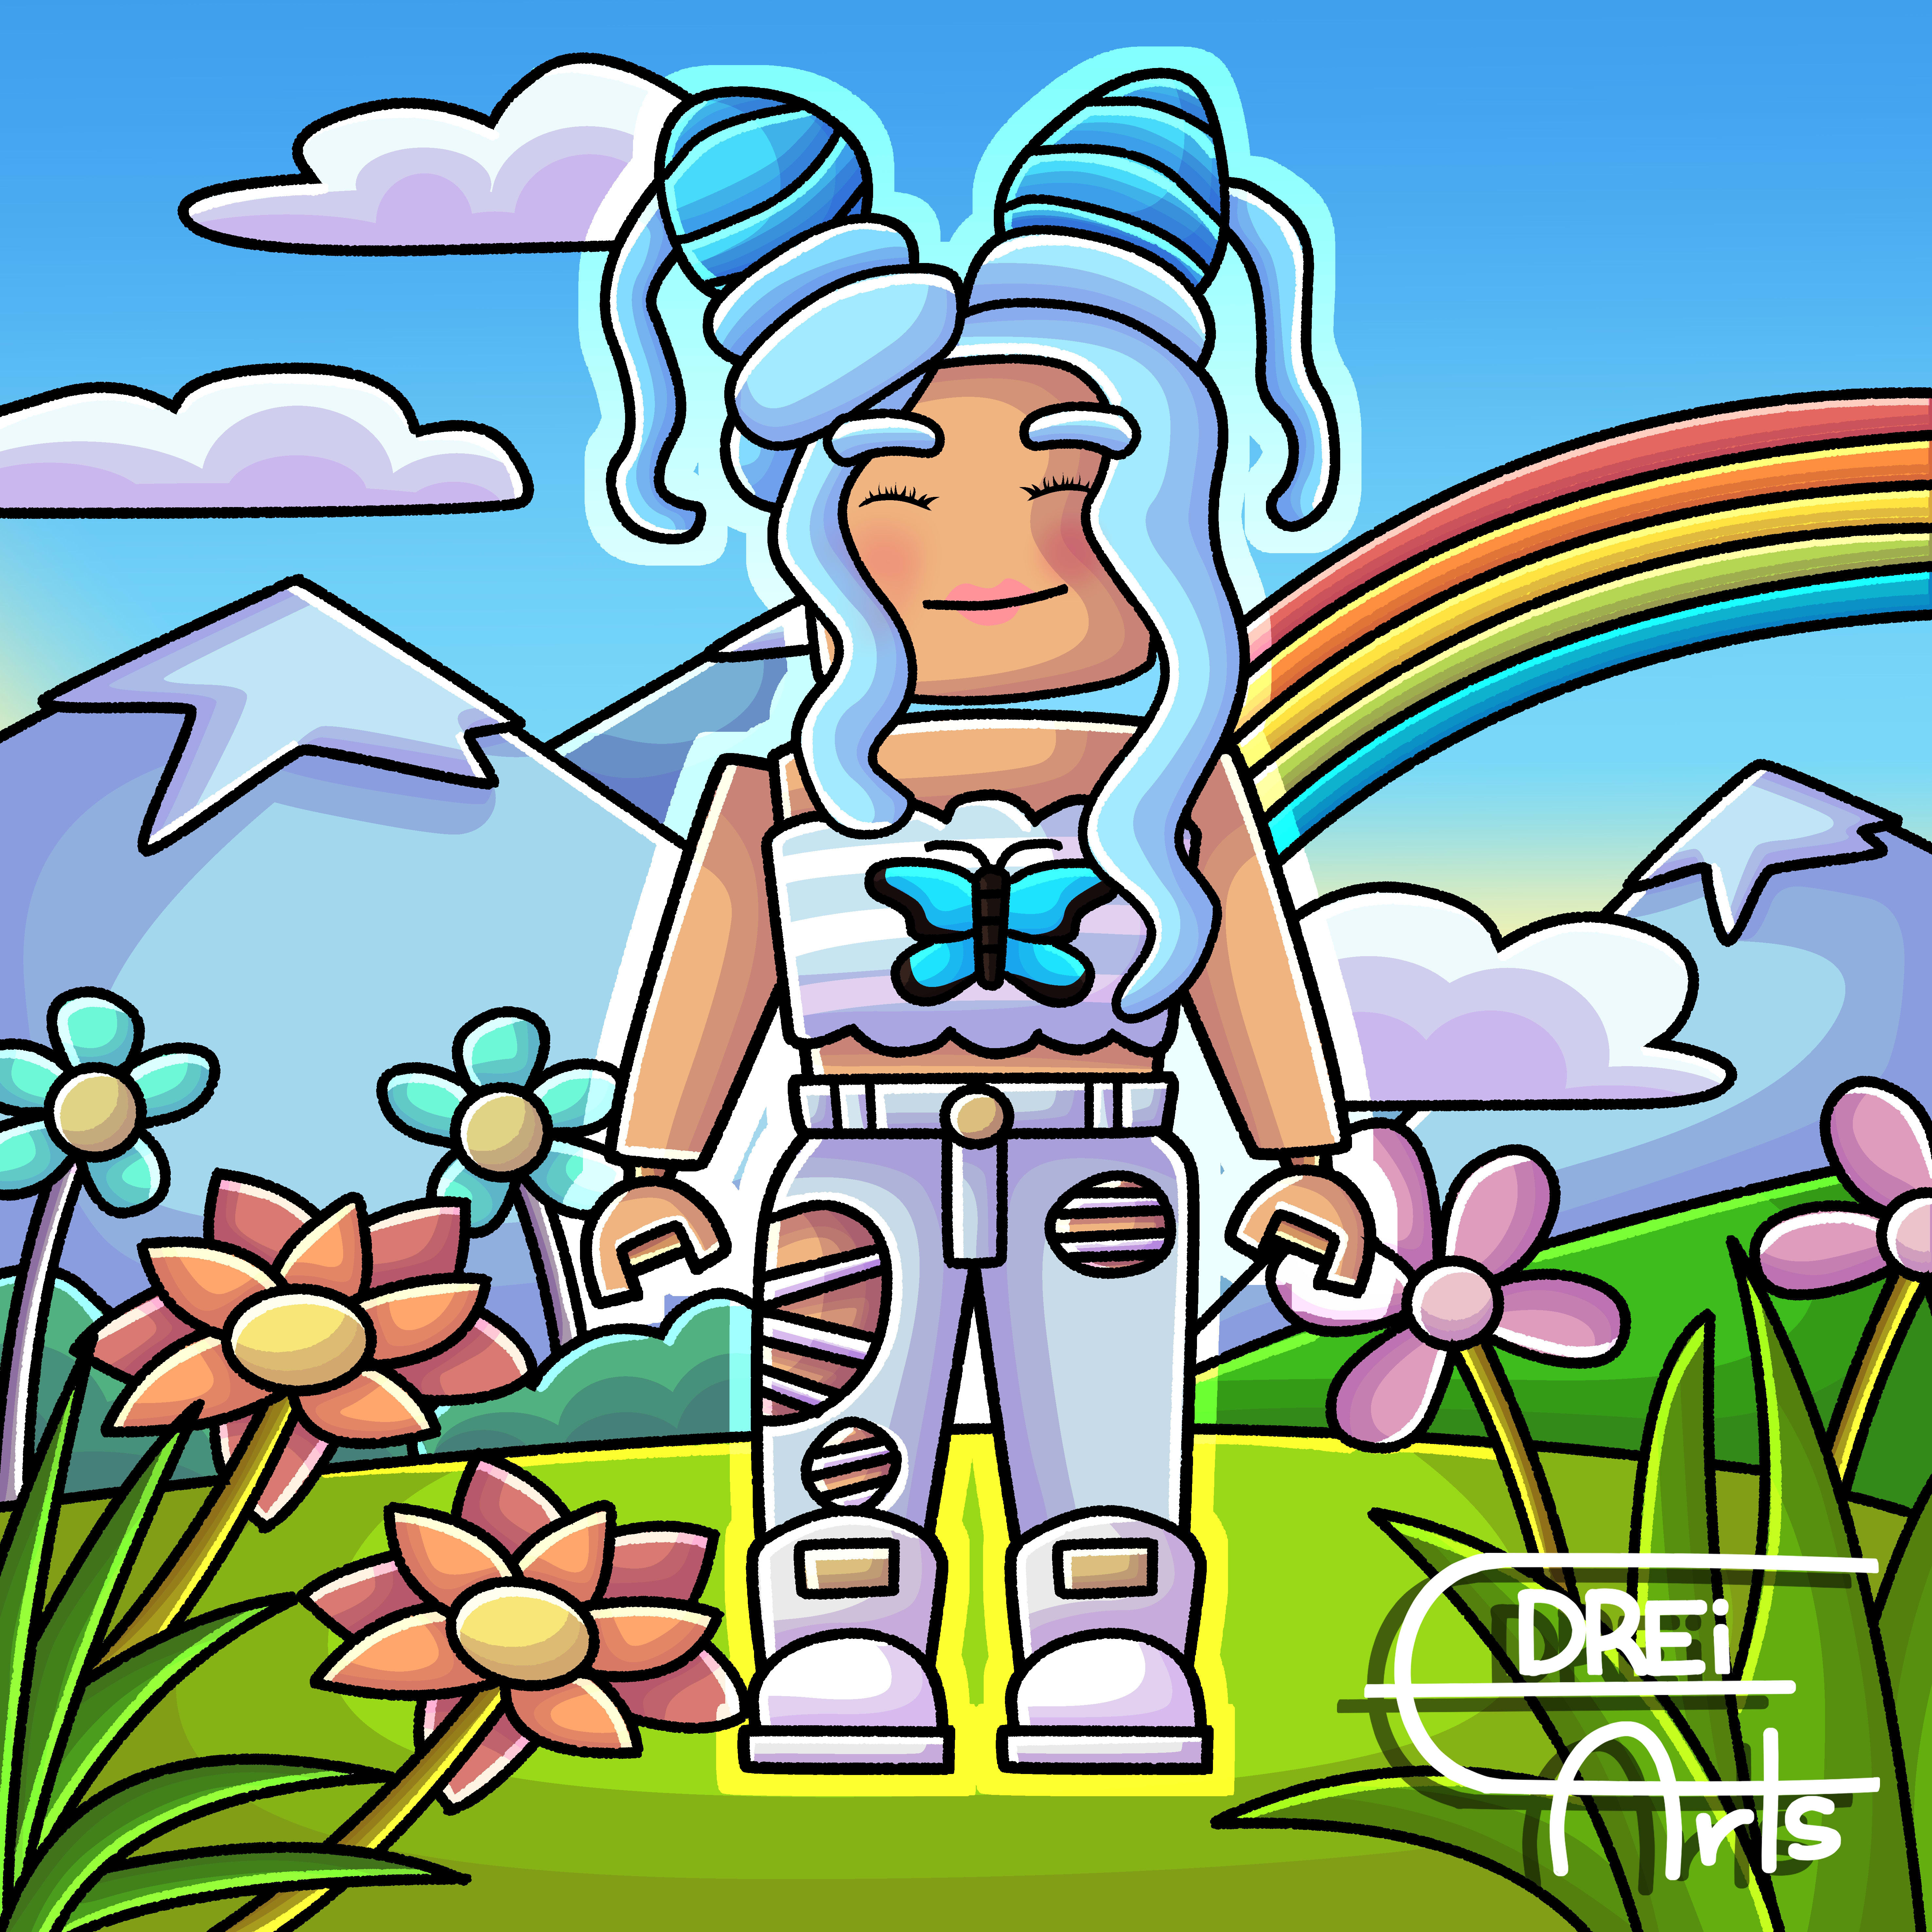 Draw Your Roblox Skin In Cartoon Style By Edreiarts - roblox background skins